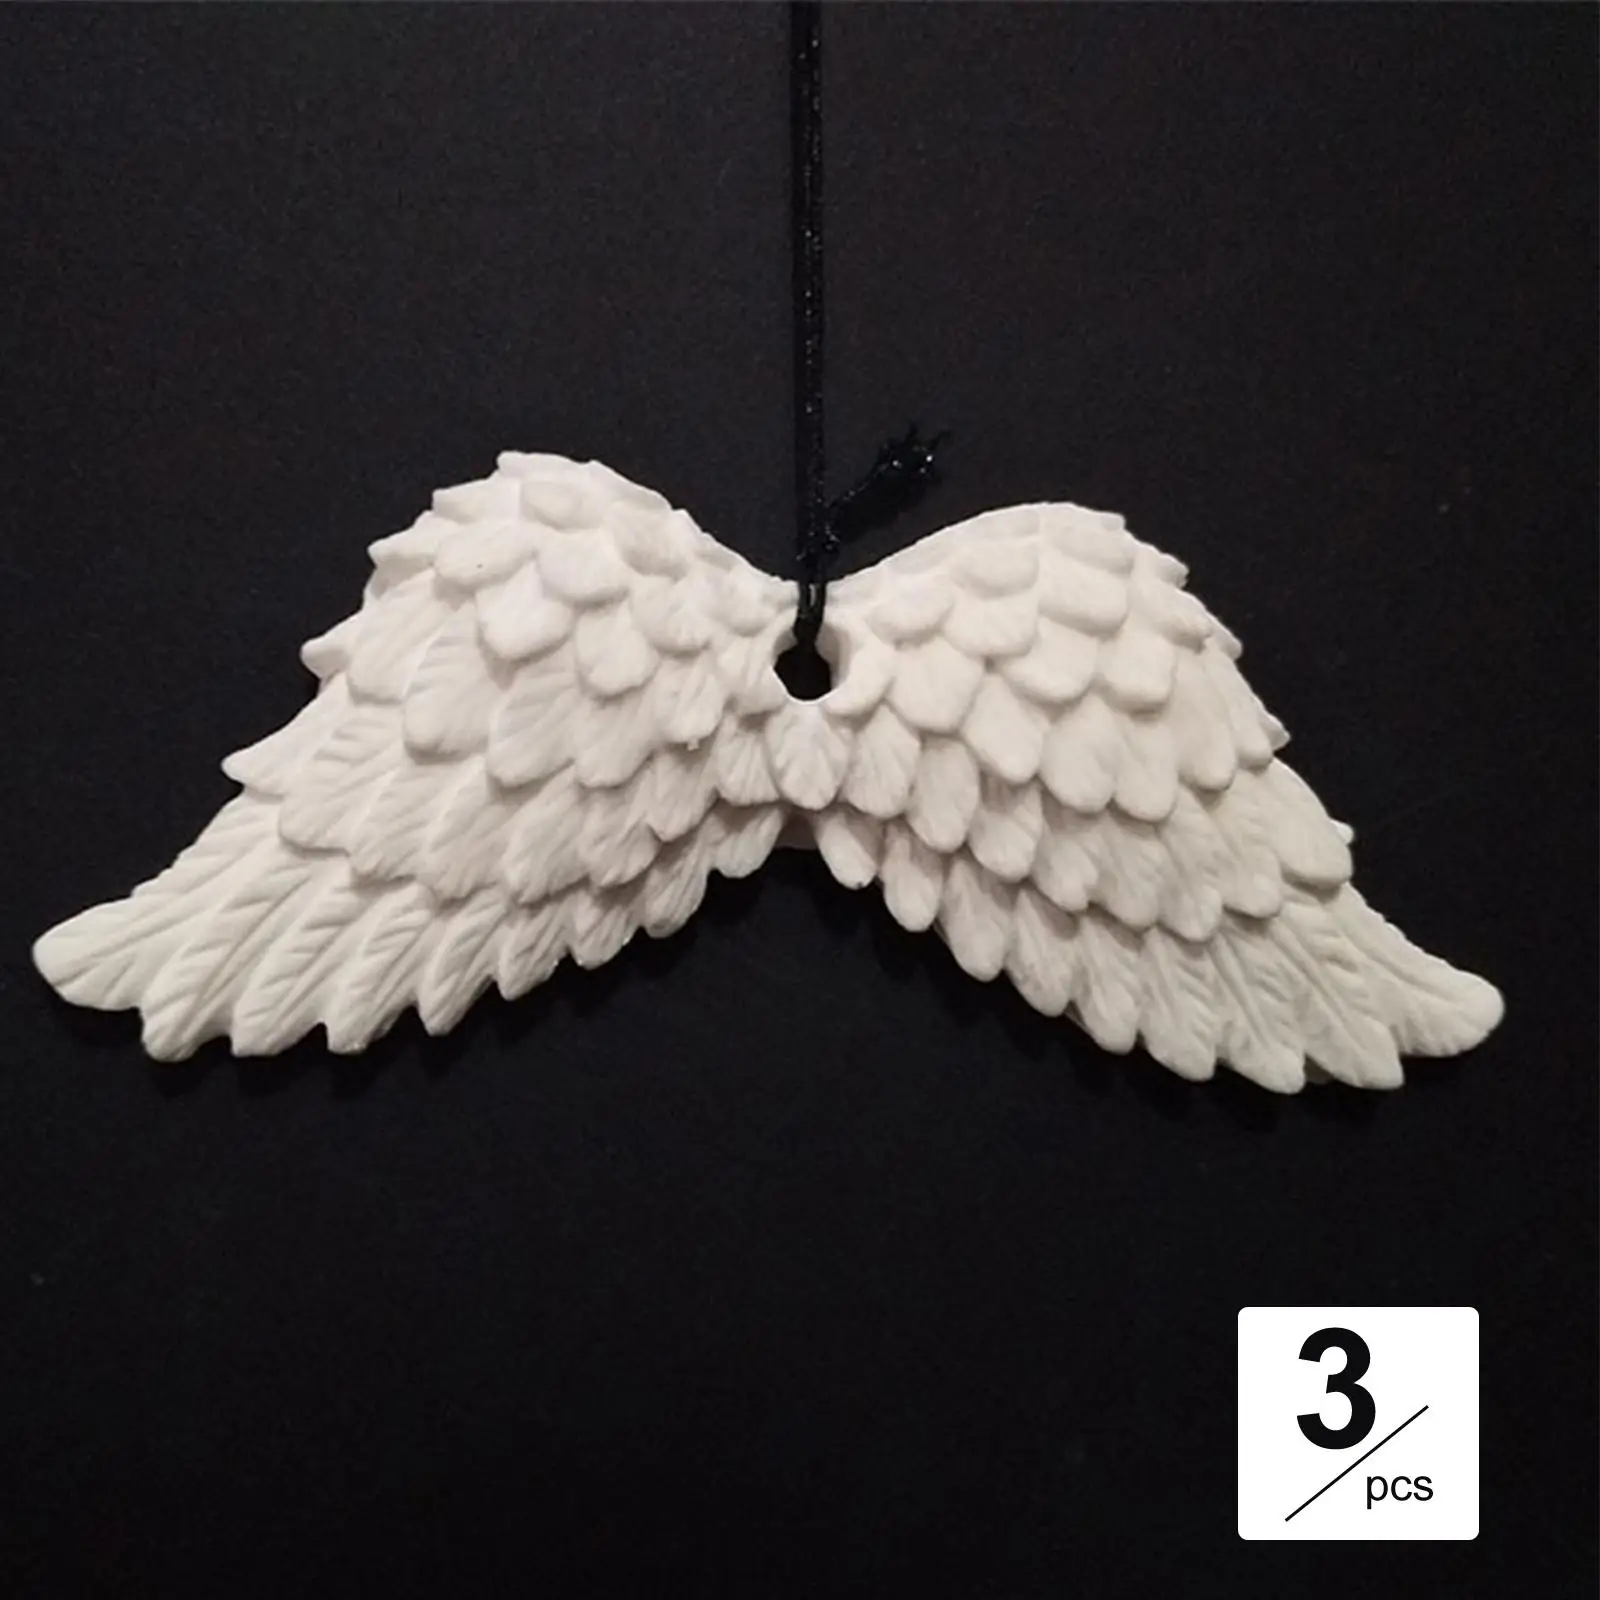 3Pcs Car Wings Pendant Ornament Portable Window Meditation Gift for Bedrooms